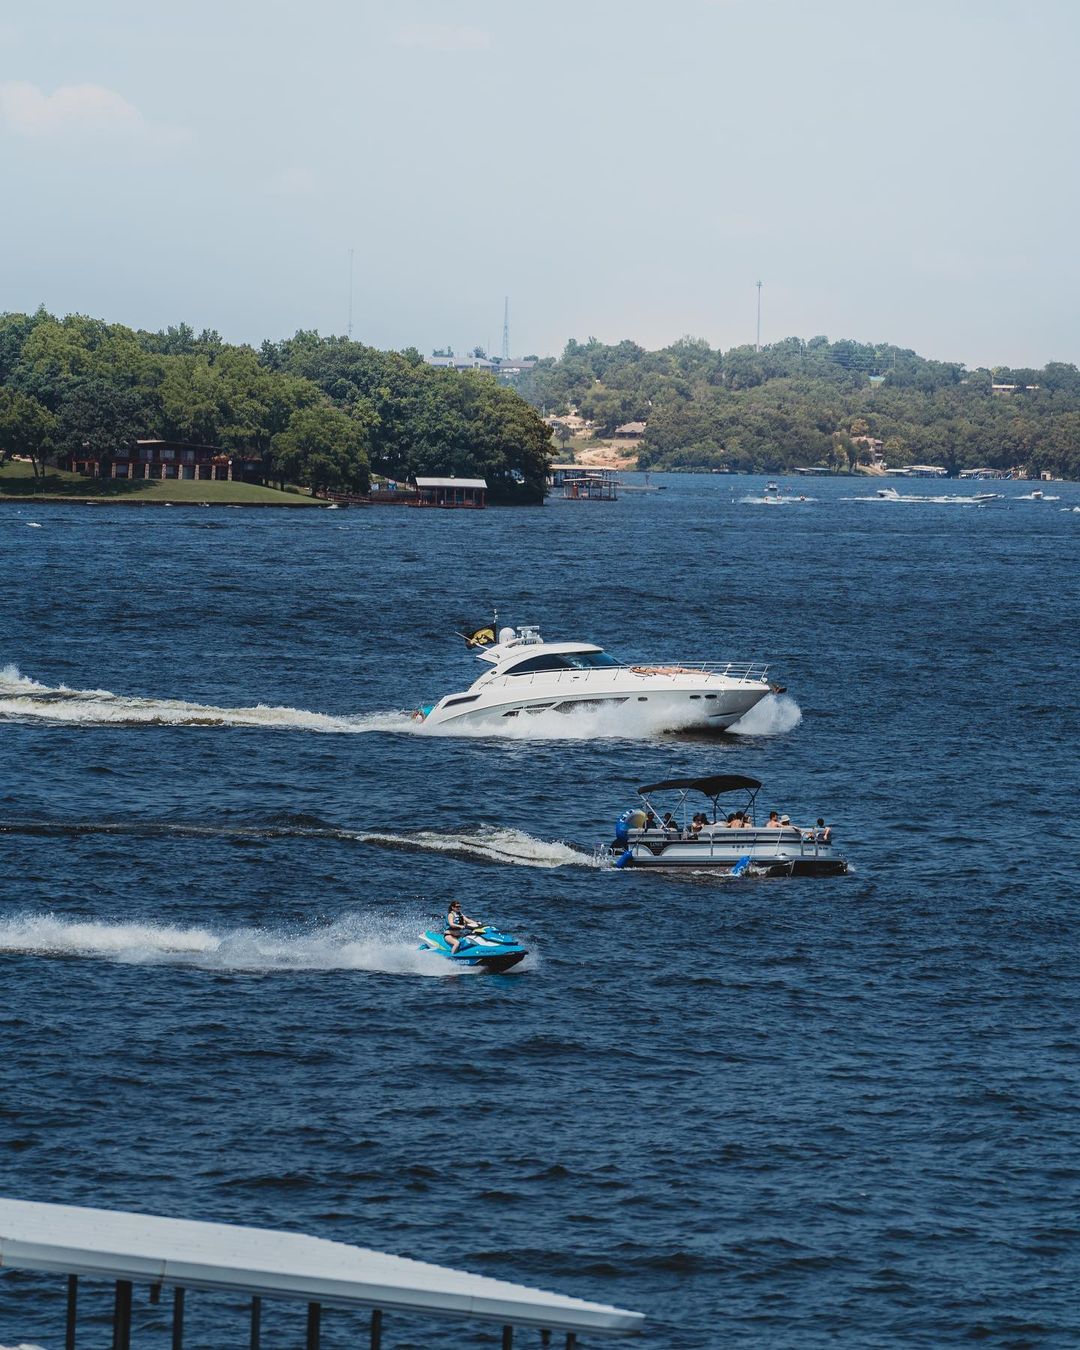 Three Boats On the Water at Lake of the Ozarks. Photo by Instagram user @lakeoftheozarks